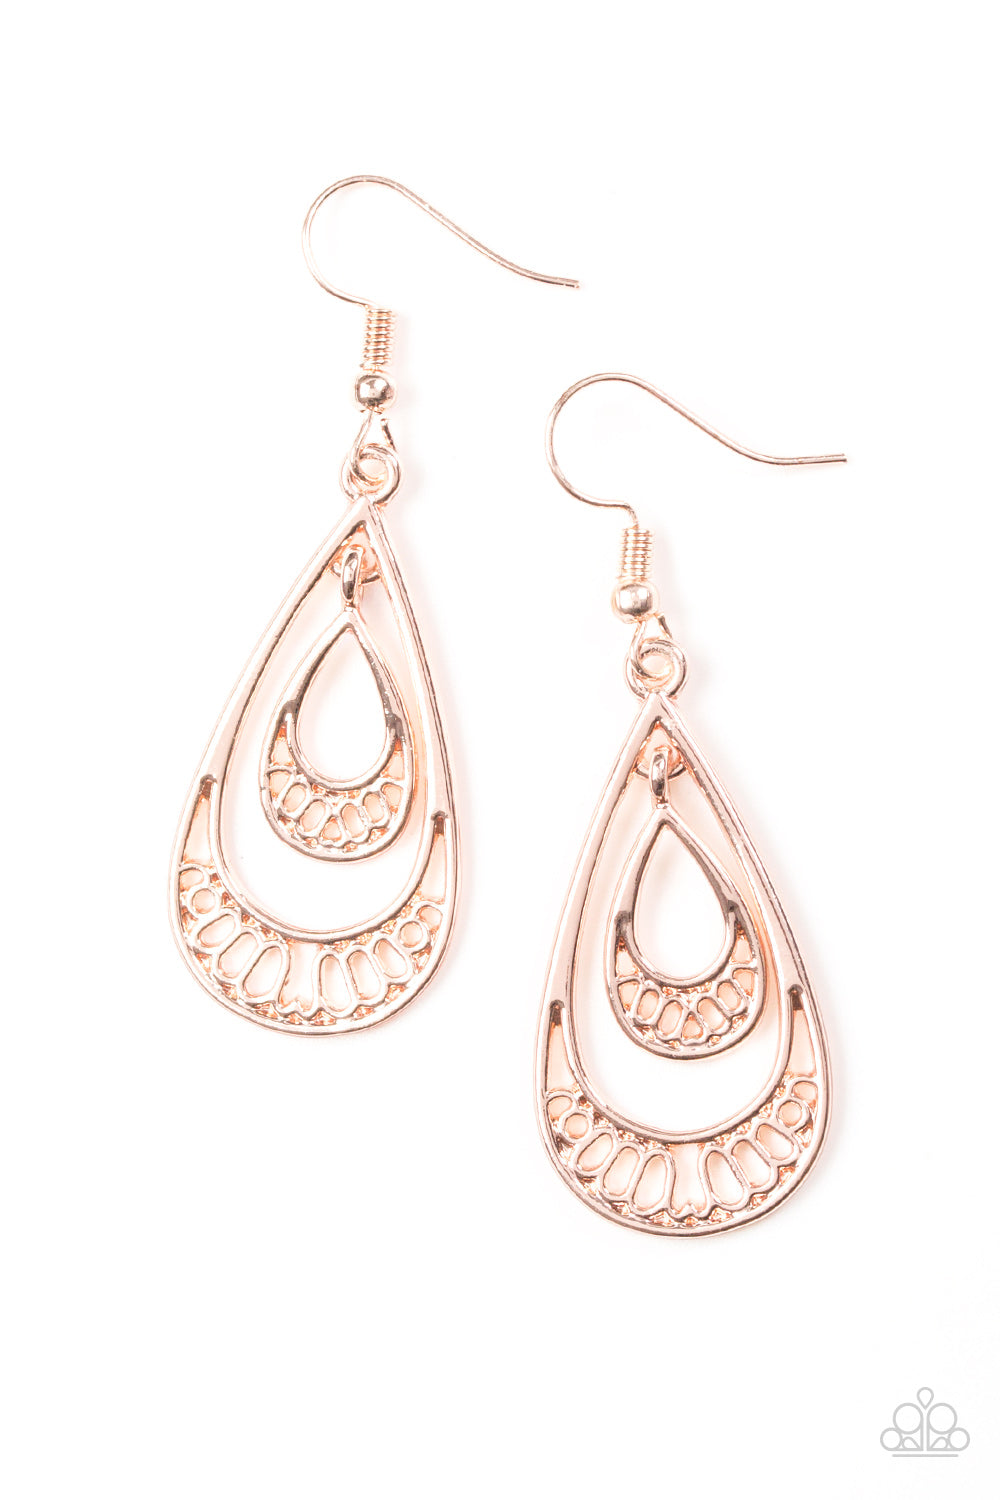 Paparazzi REIGNed Out - Rose Gold Teardrop Earrings – Sugar Bee Bling ...